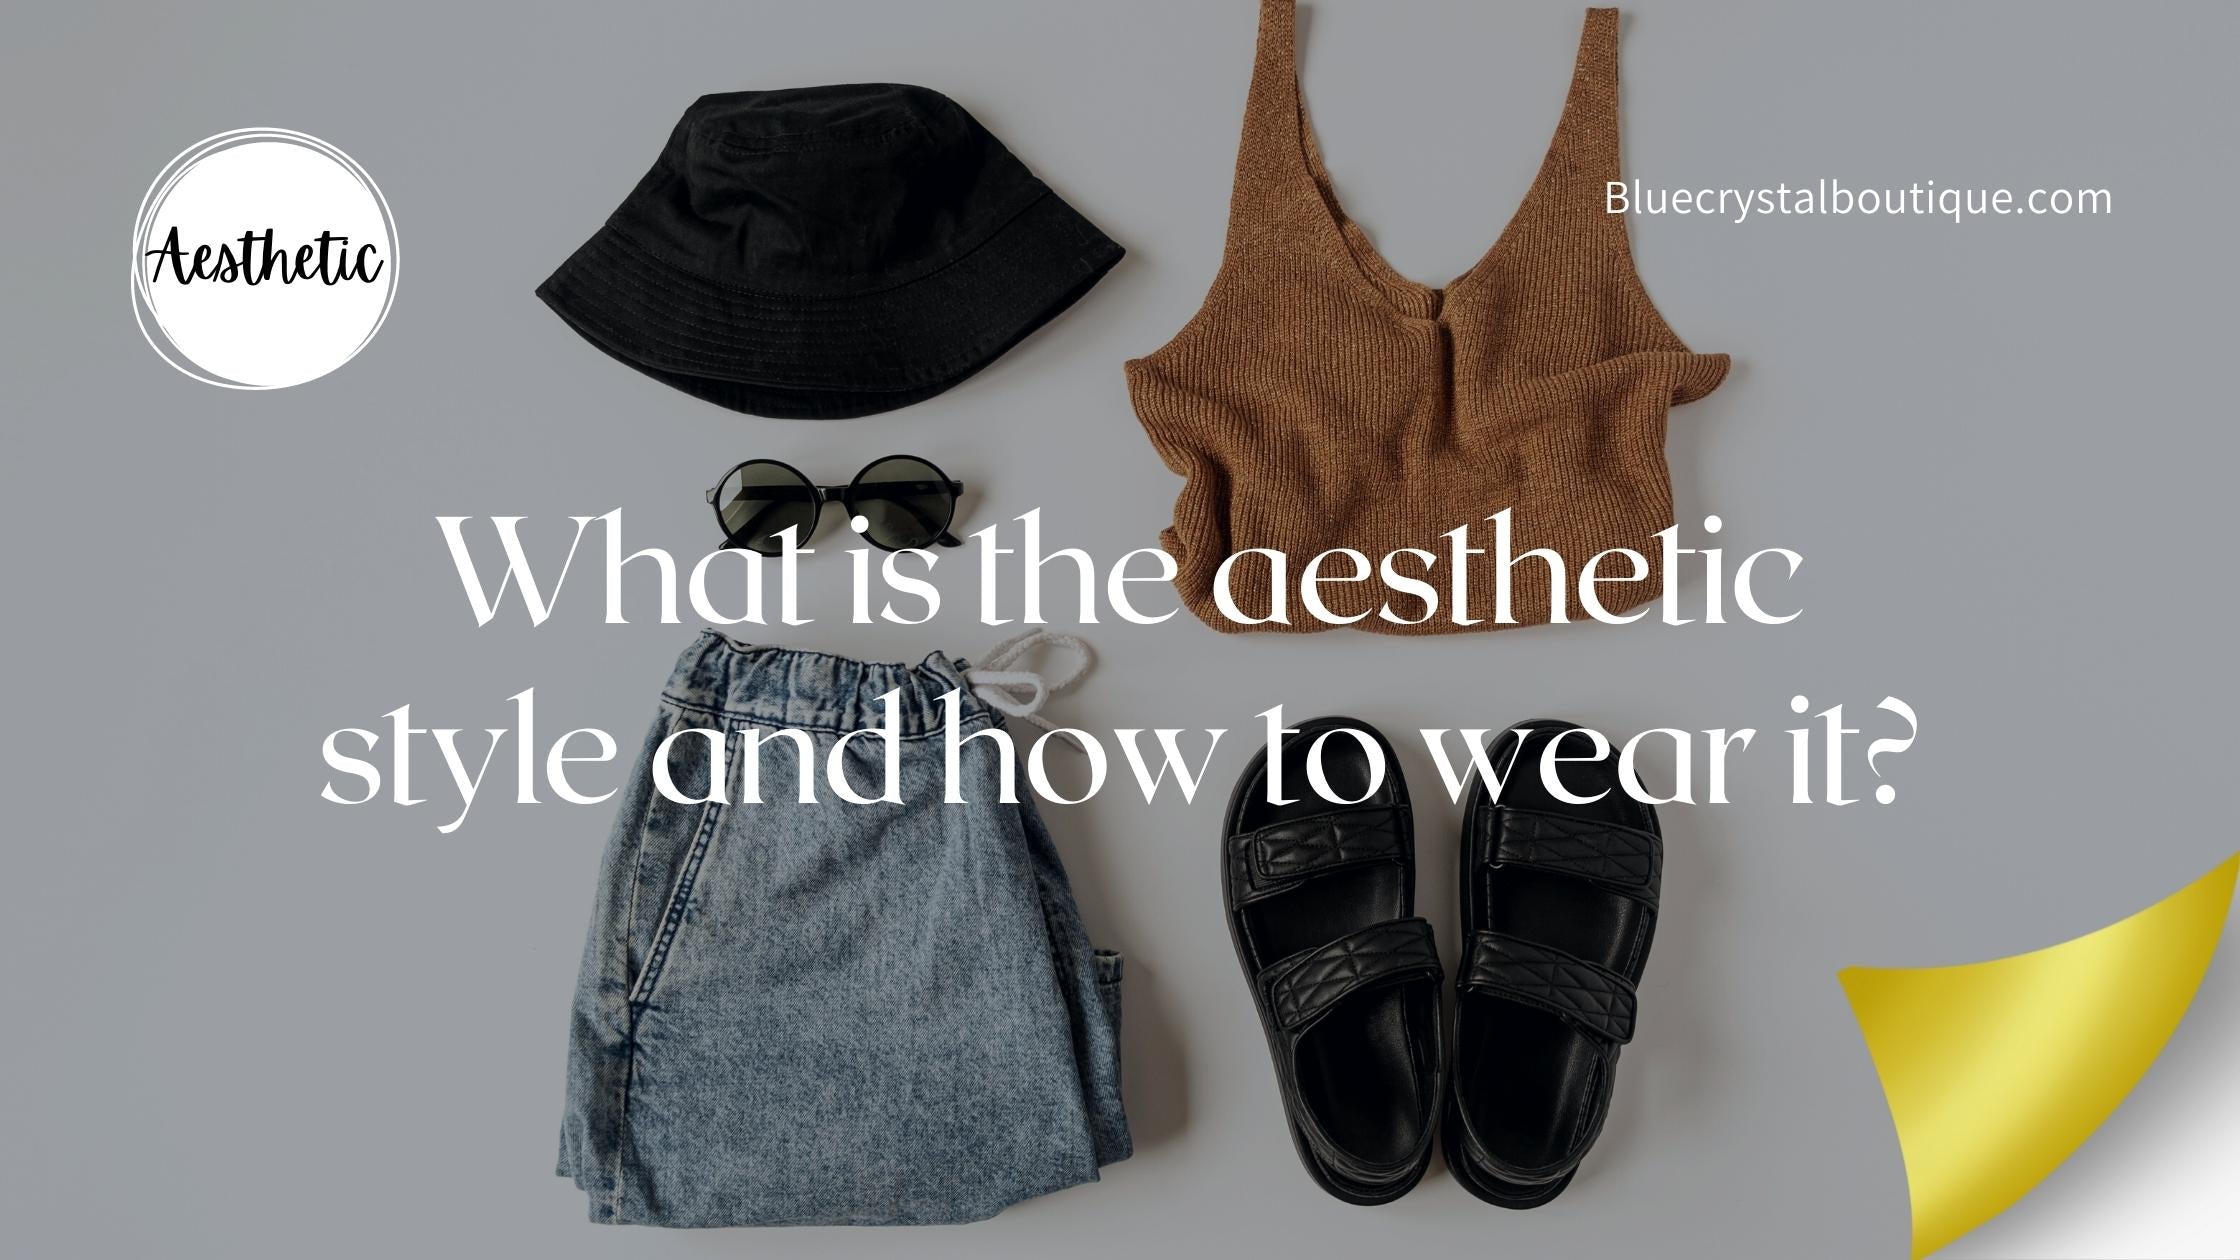 What is the aesthetic style and how to wear it? – Blue Crystal Boutique